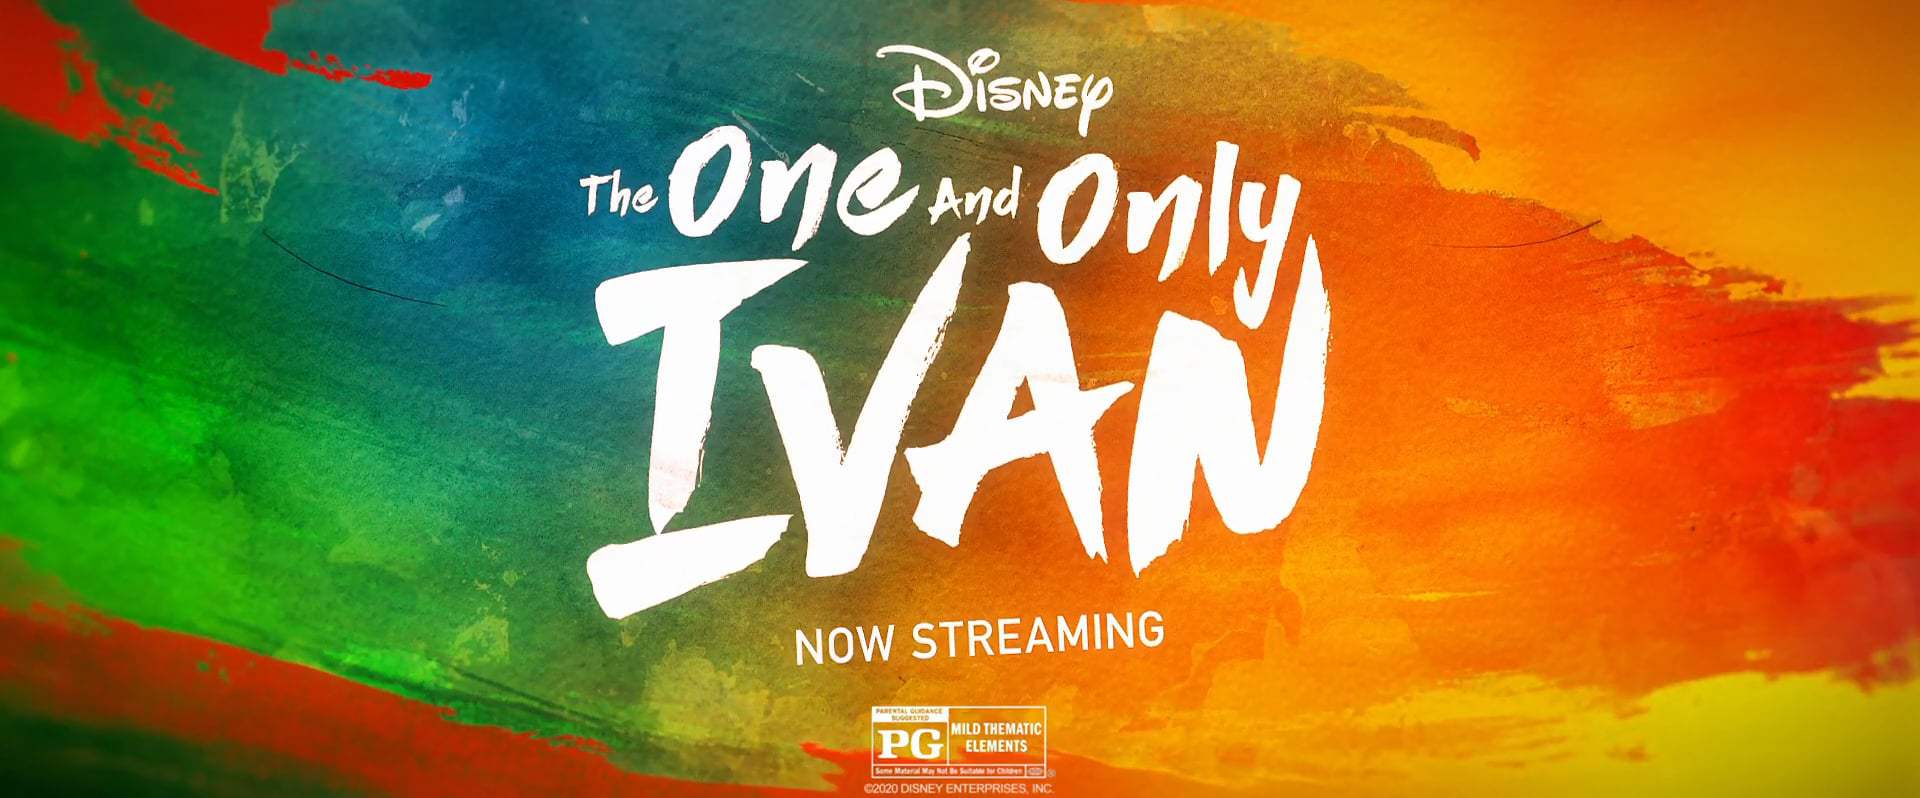 The One and Only Ivan TV Spot - Now Streaming (2020) Screen Capture #4